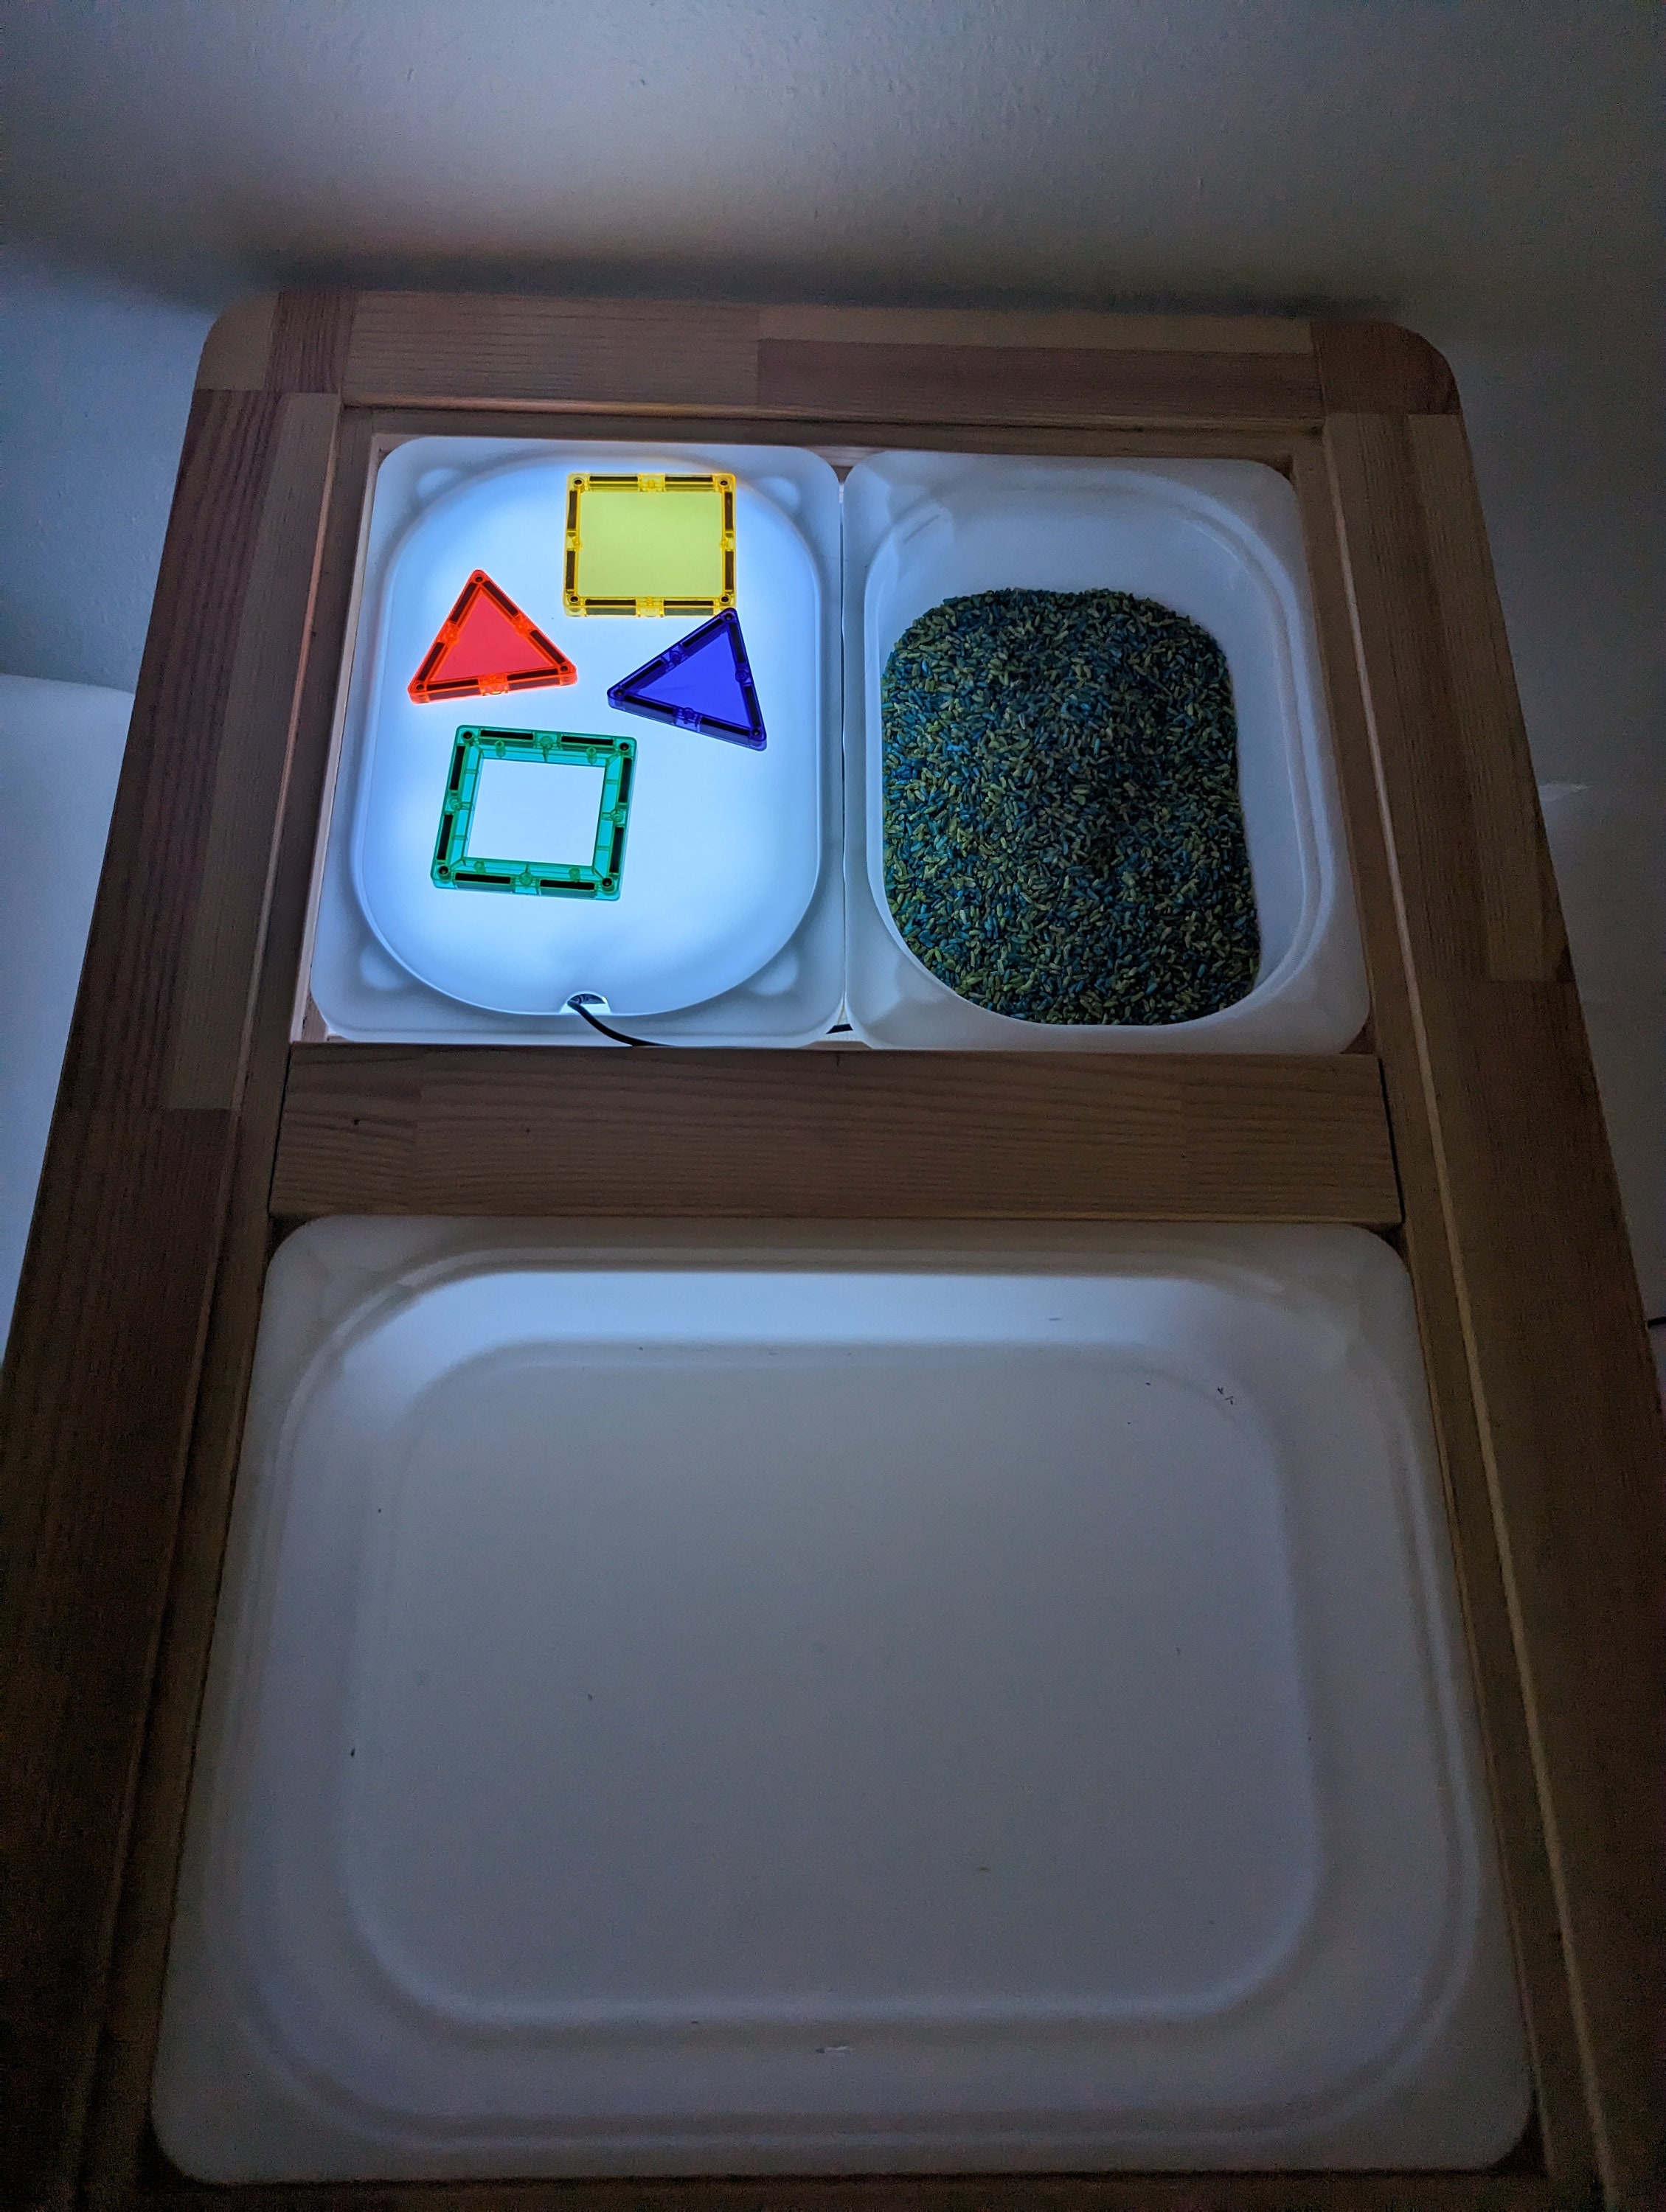 Classroom Edition Spring Loose Parts Tray, Light Table Translucent